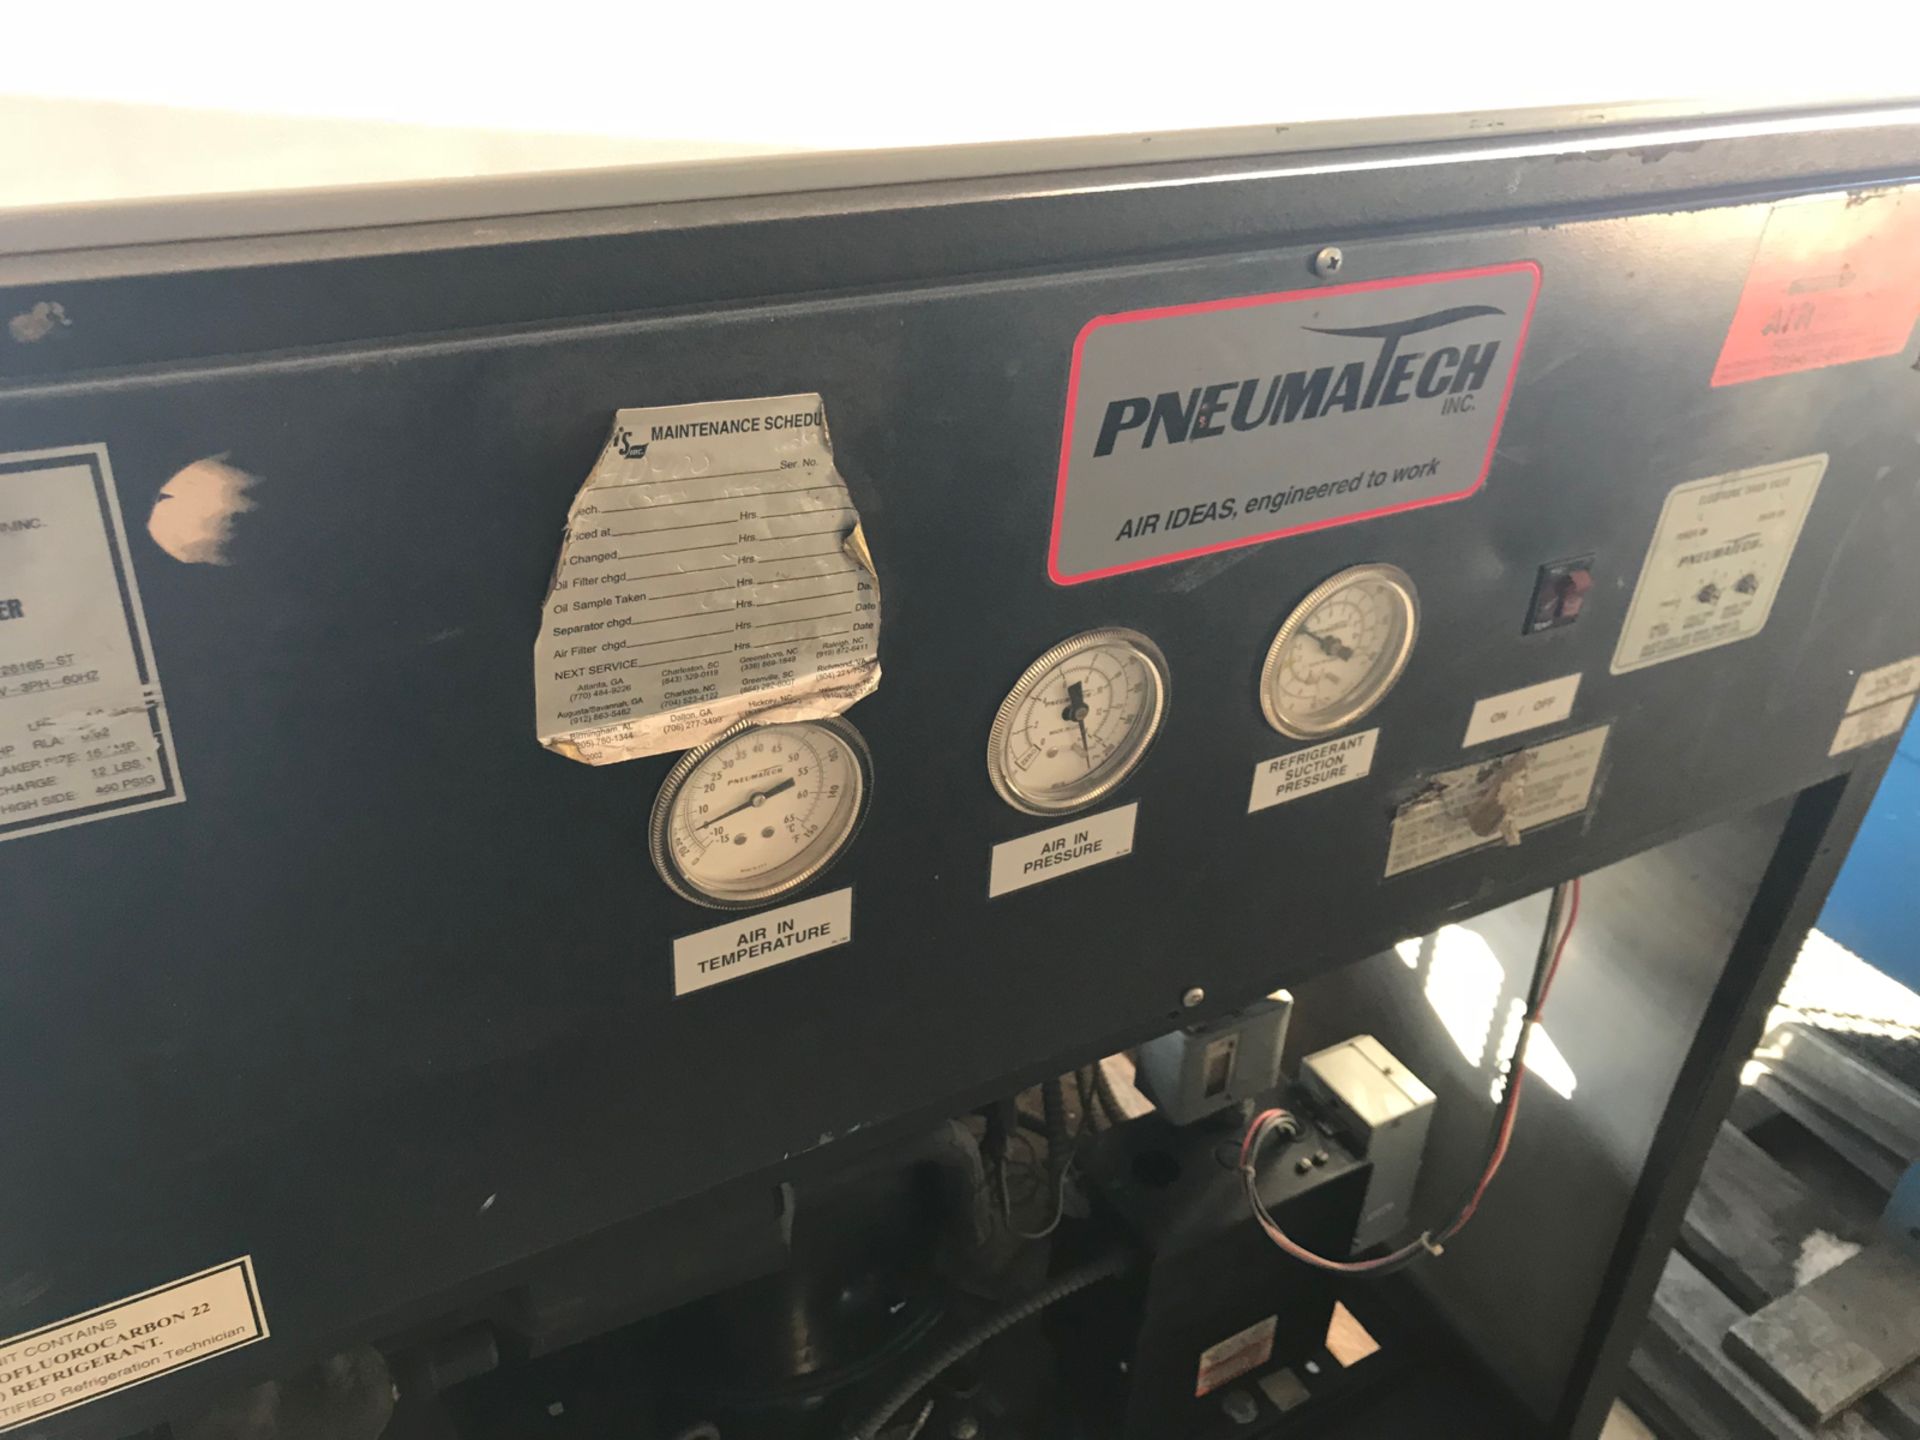 (8121) Pneumatech Non Cycling refrigerated Model #Ad-399 - Image 3 of 3